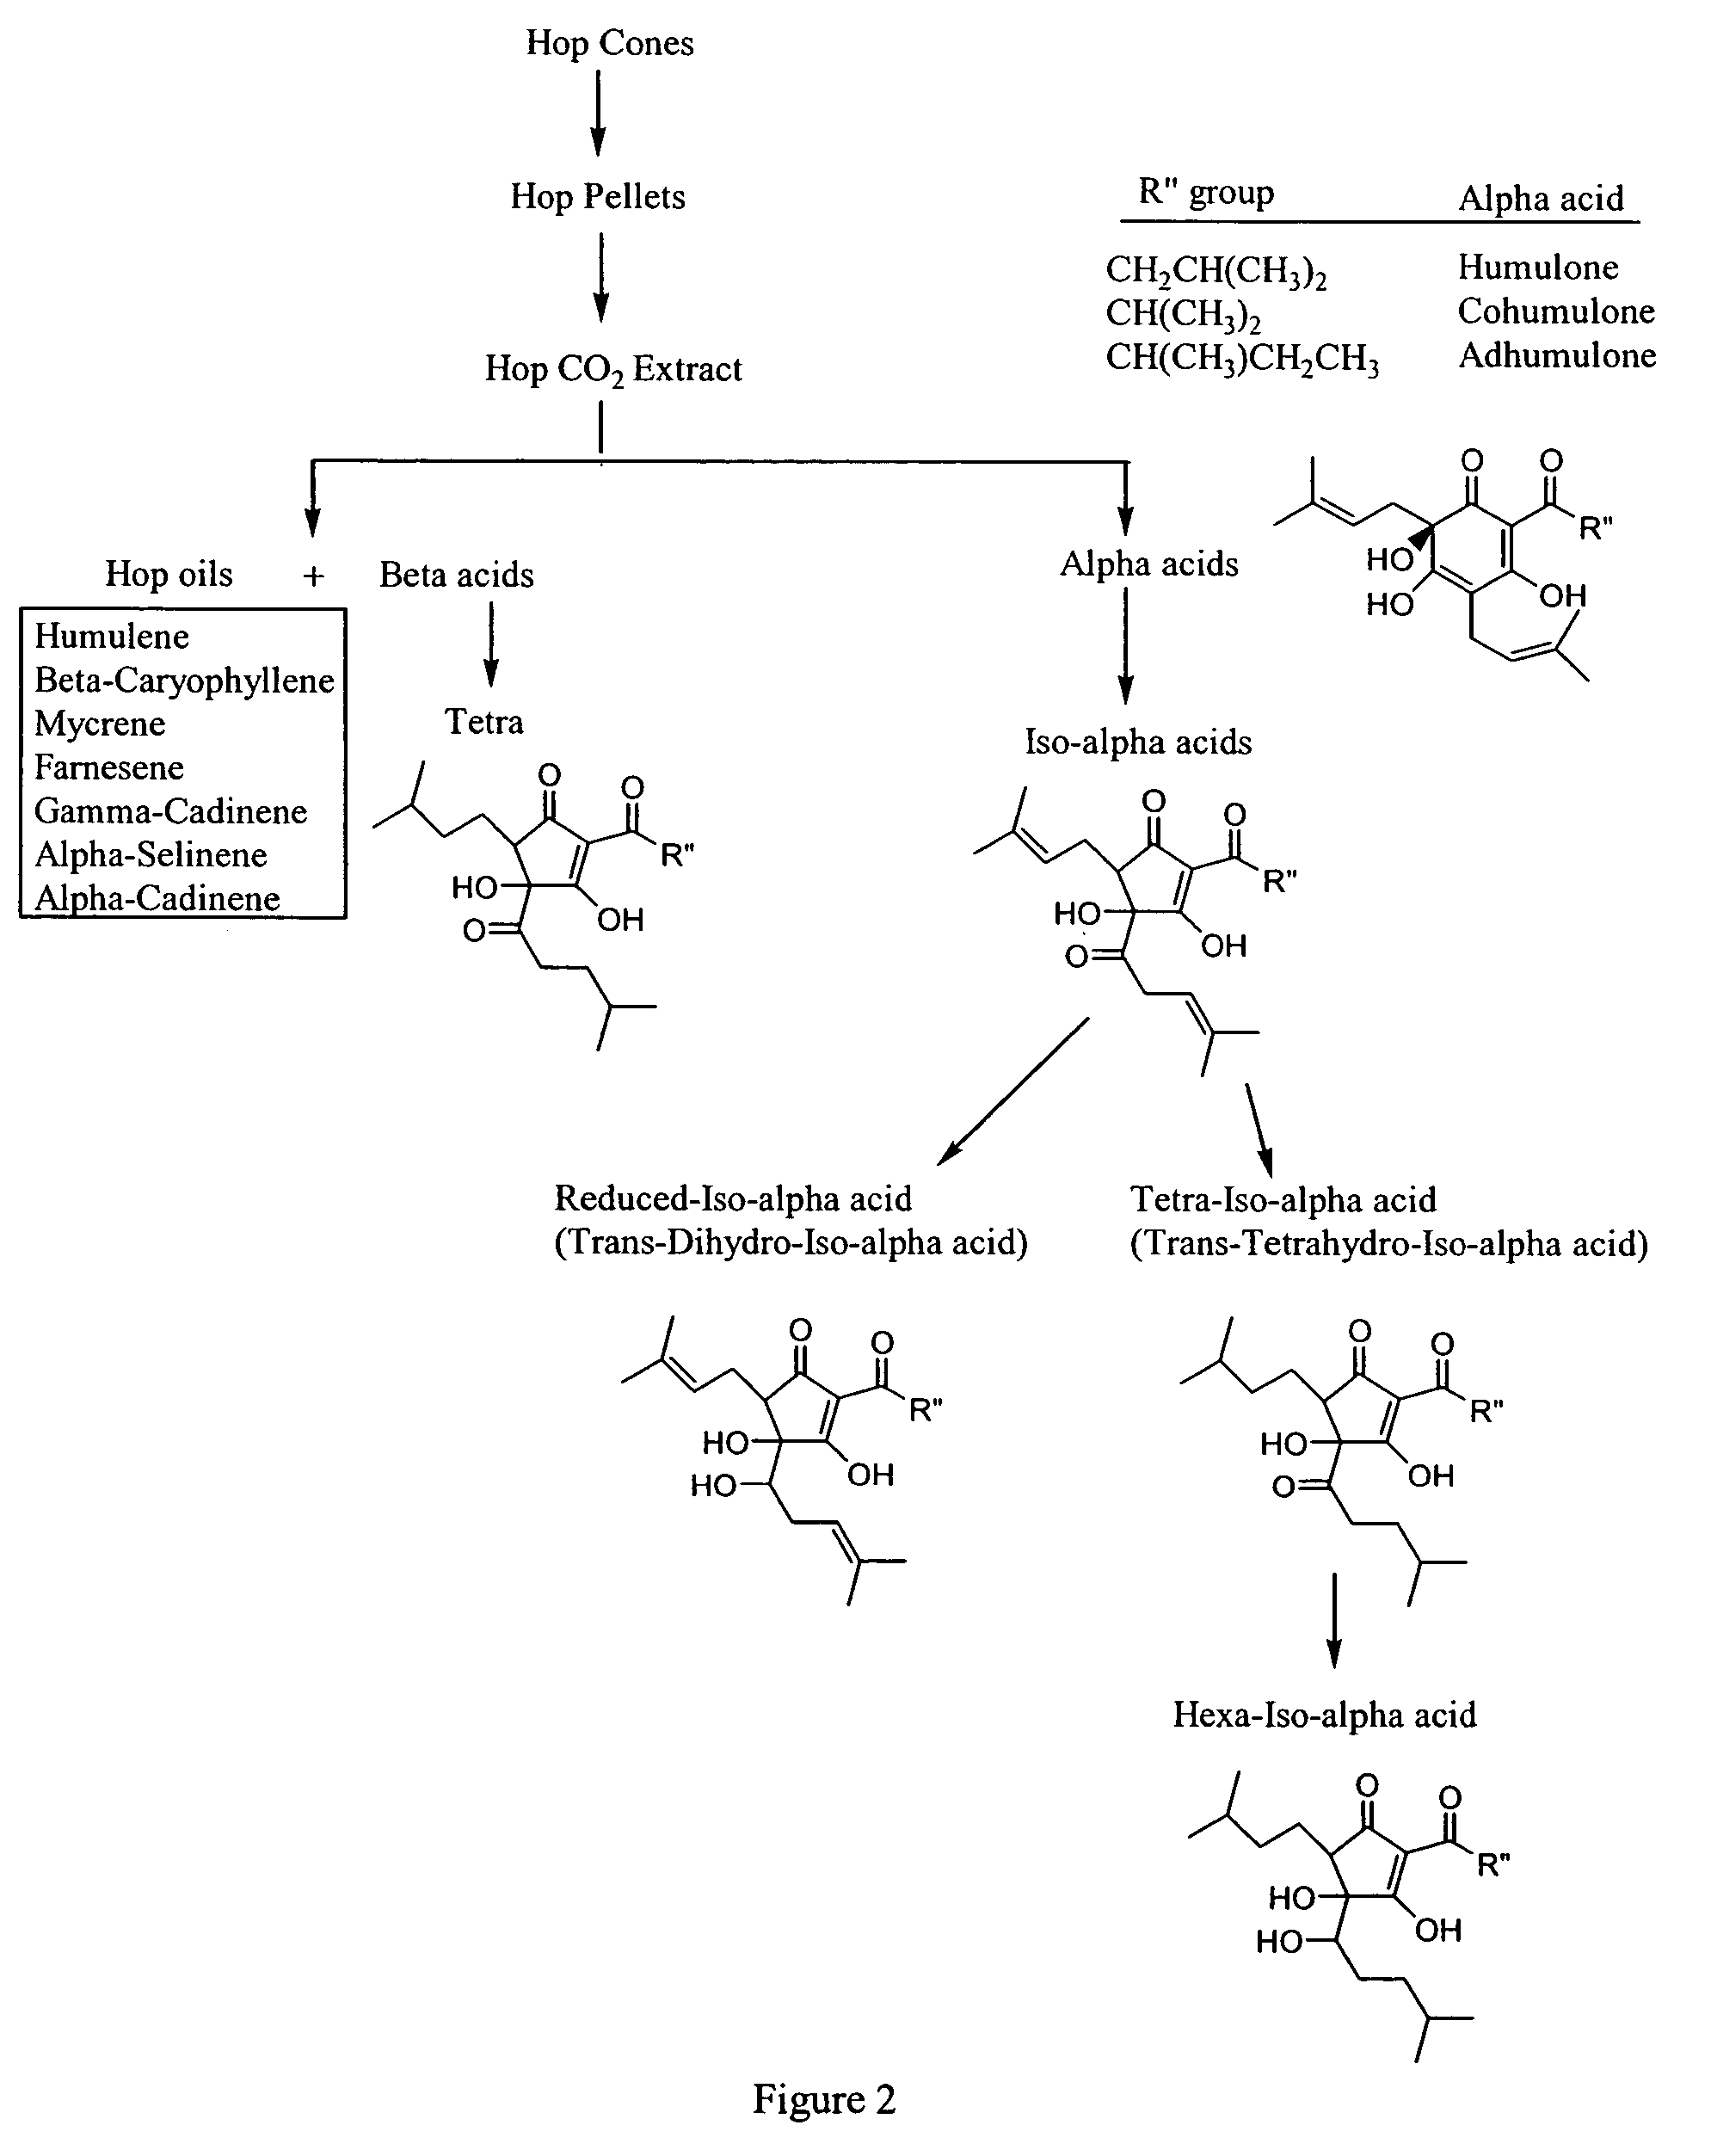 Anti-inflammatory pharmaceutical compositions for reducing inflammation and the treatment or prevention of gastric toxicity